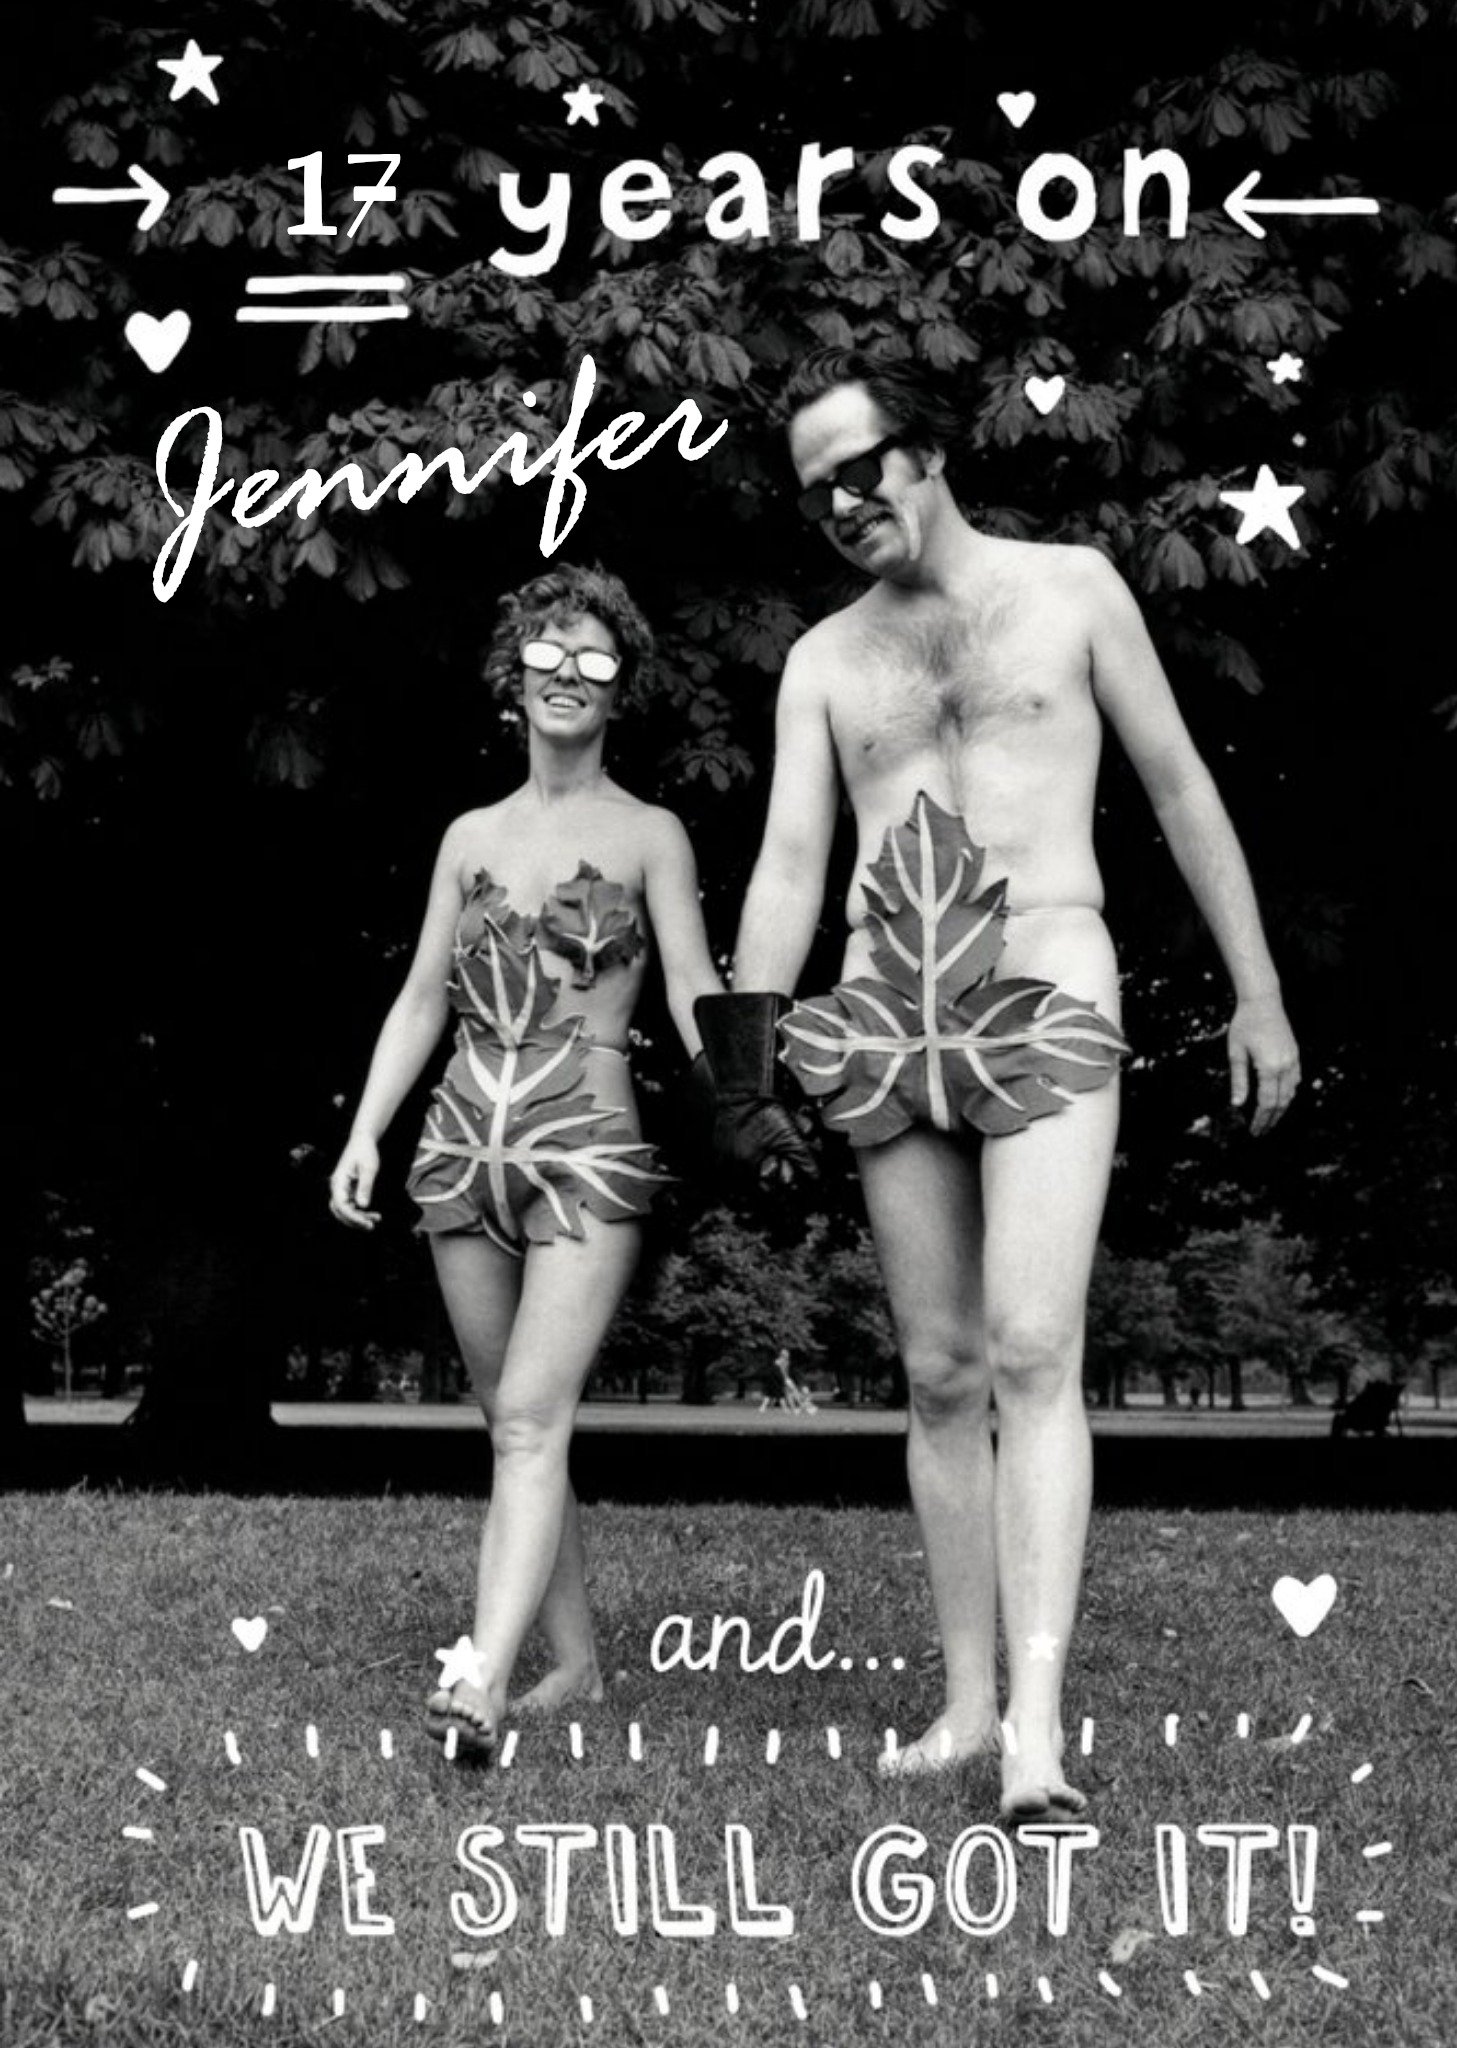 Moonpig Cheeky We Still Got It Personalised Anniversary Card, Large